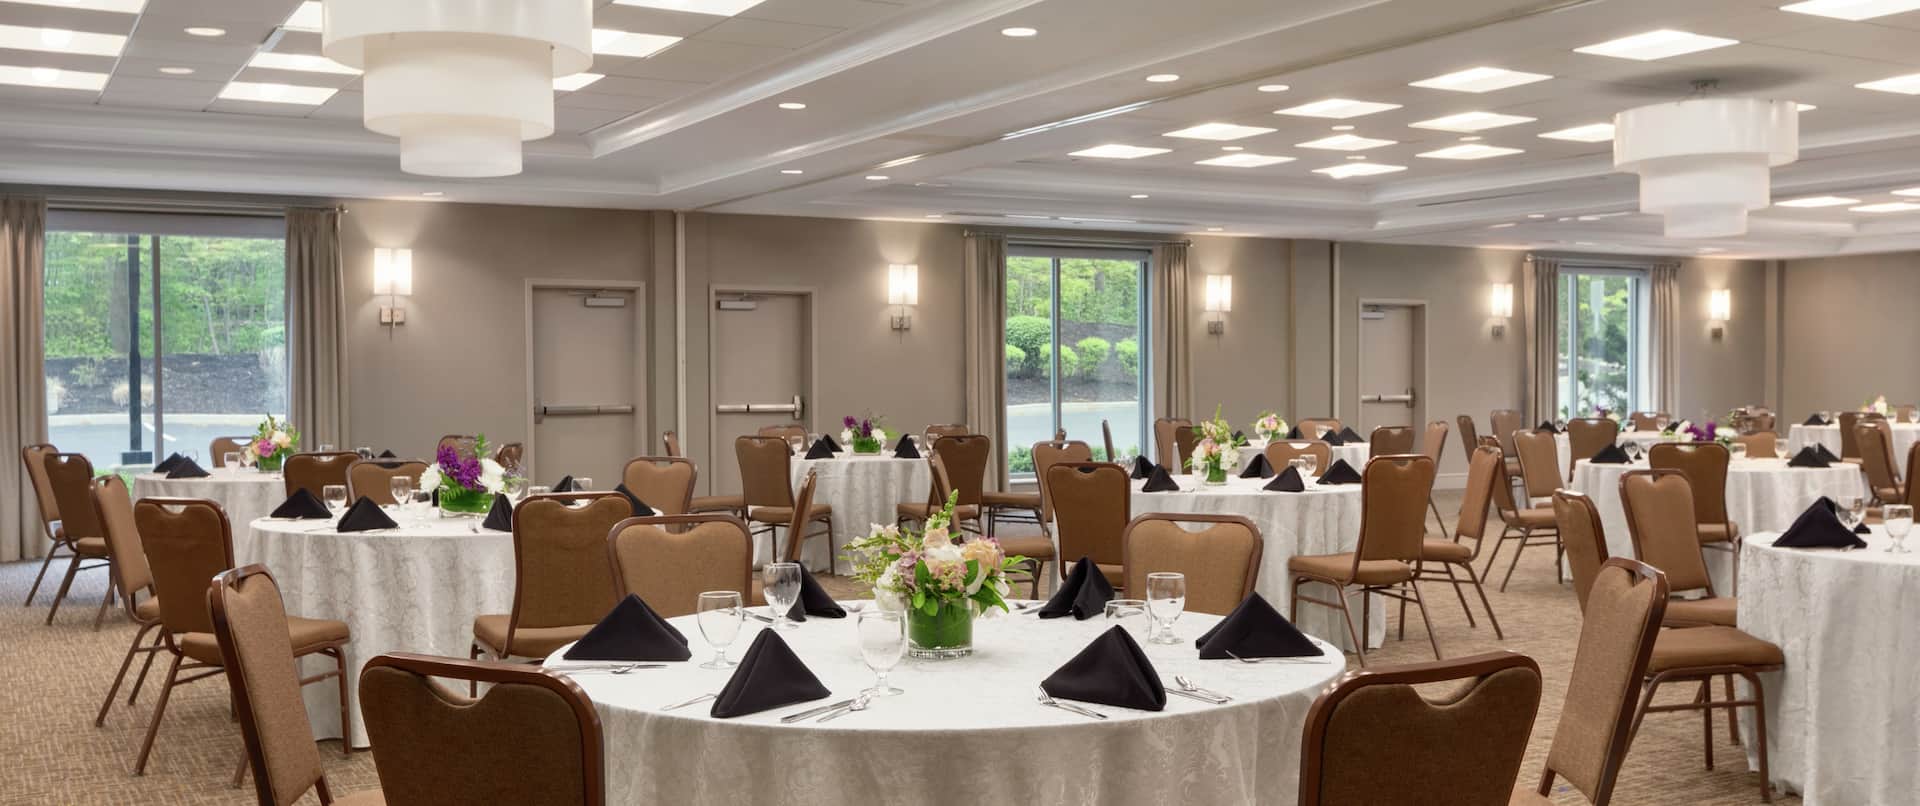 Spacious combined meeting rooms fully equipped with banquet setup, beautiful floral center pieces, and large windows.